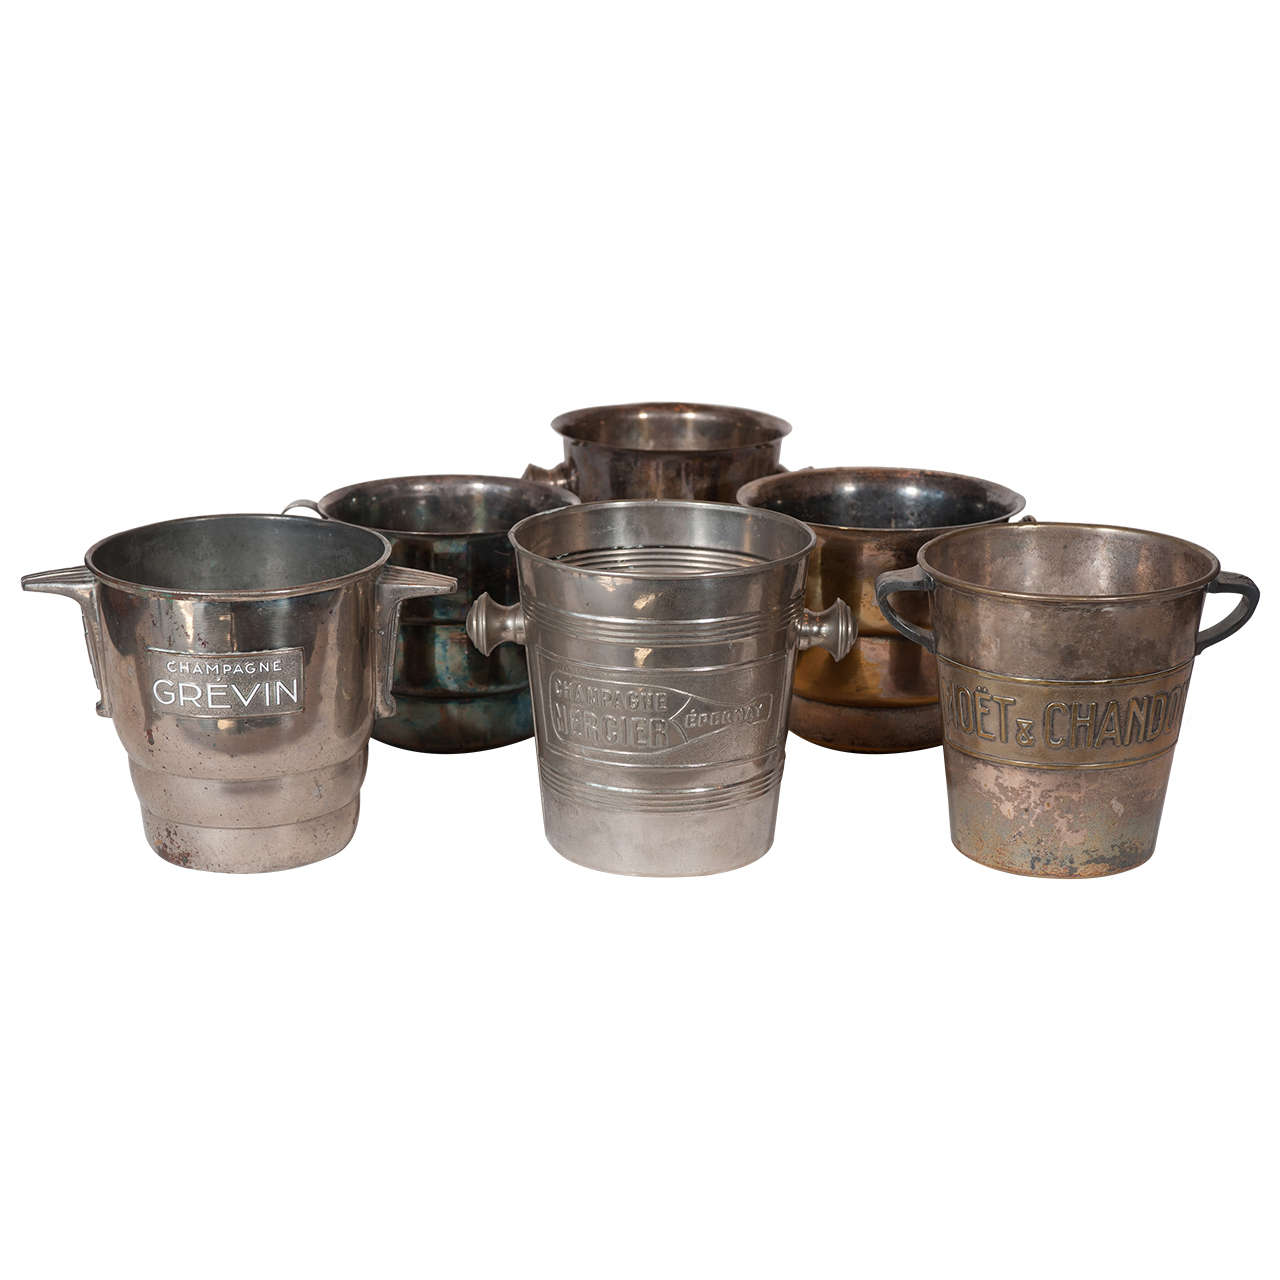 20th Century French Deco Champagne Ice Buckets, c. 1930 Paris For Sale